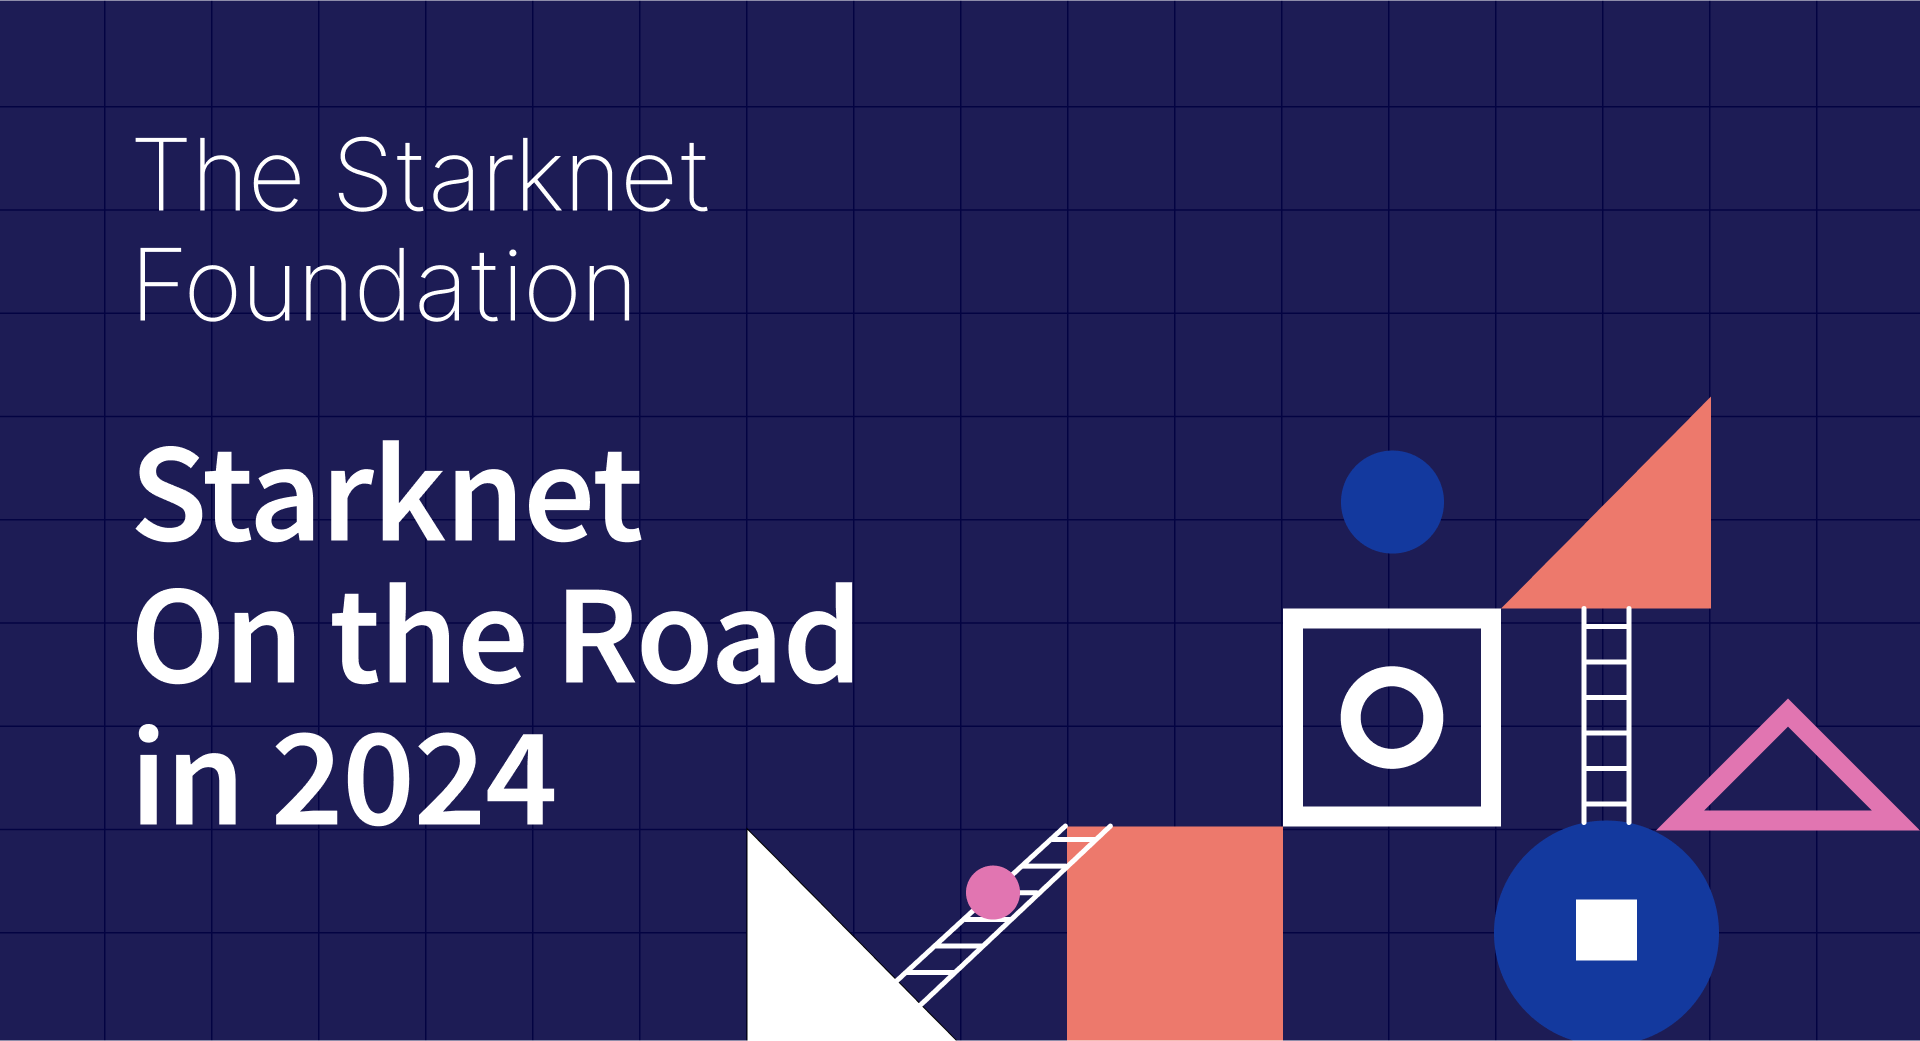 The Starknet Foundation on the Road 2024